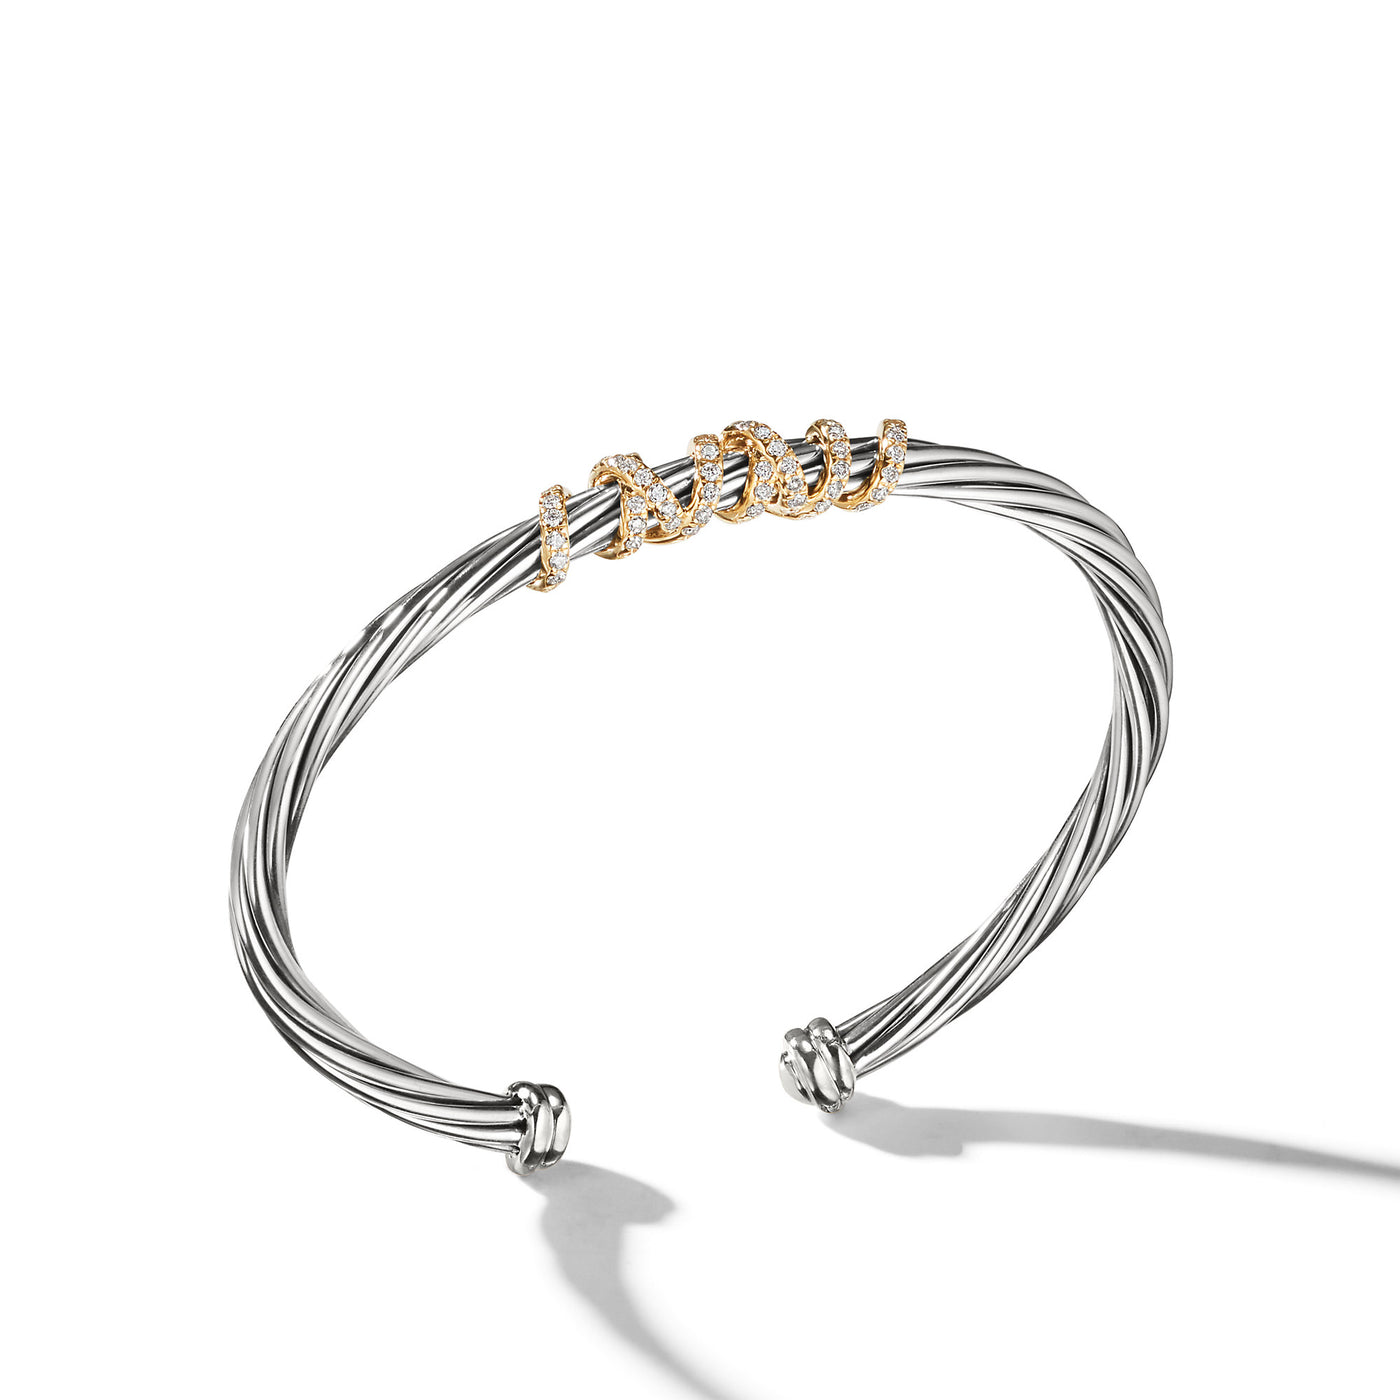 Helena Center Station Bracelet in Sterling Silver with 18K Yellow Gold and Diamonds\, 4mm